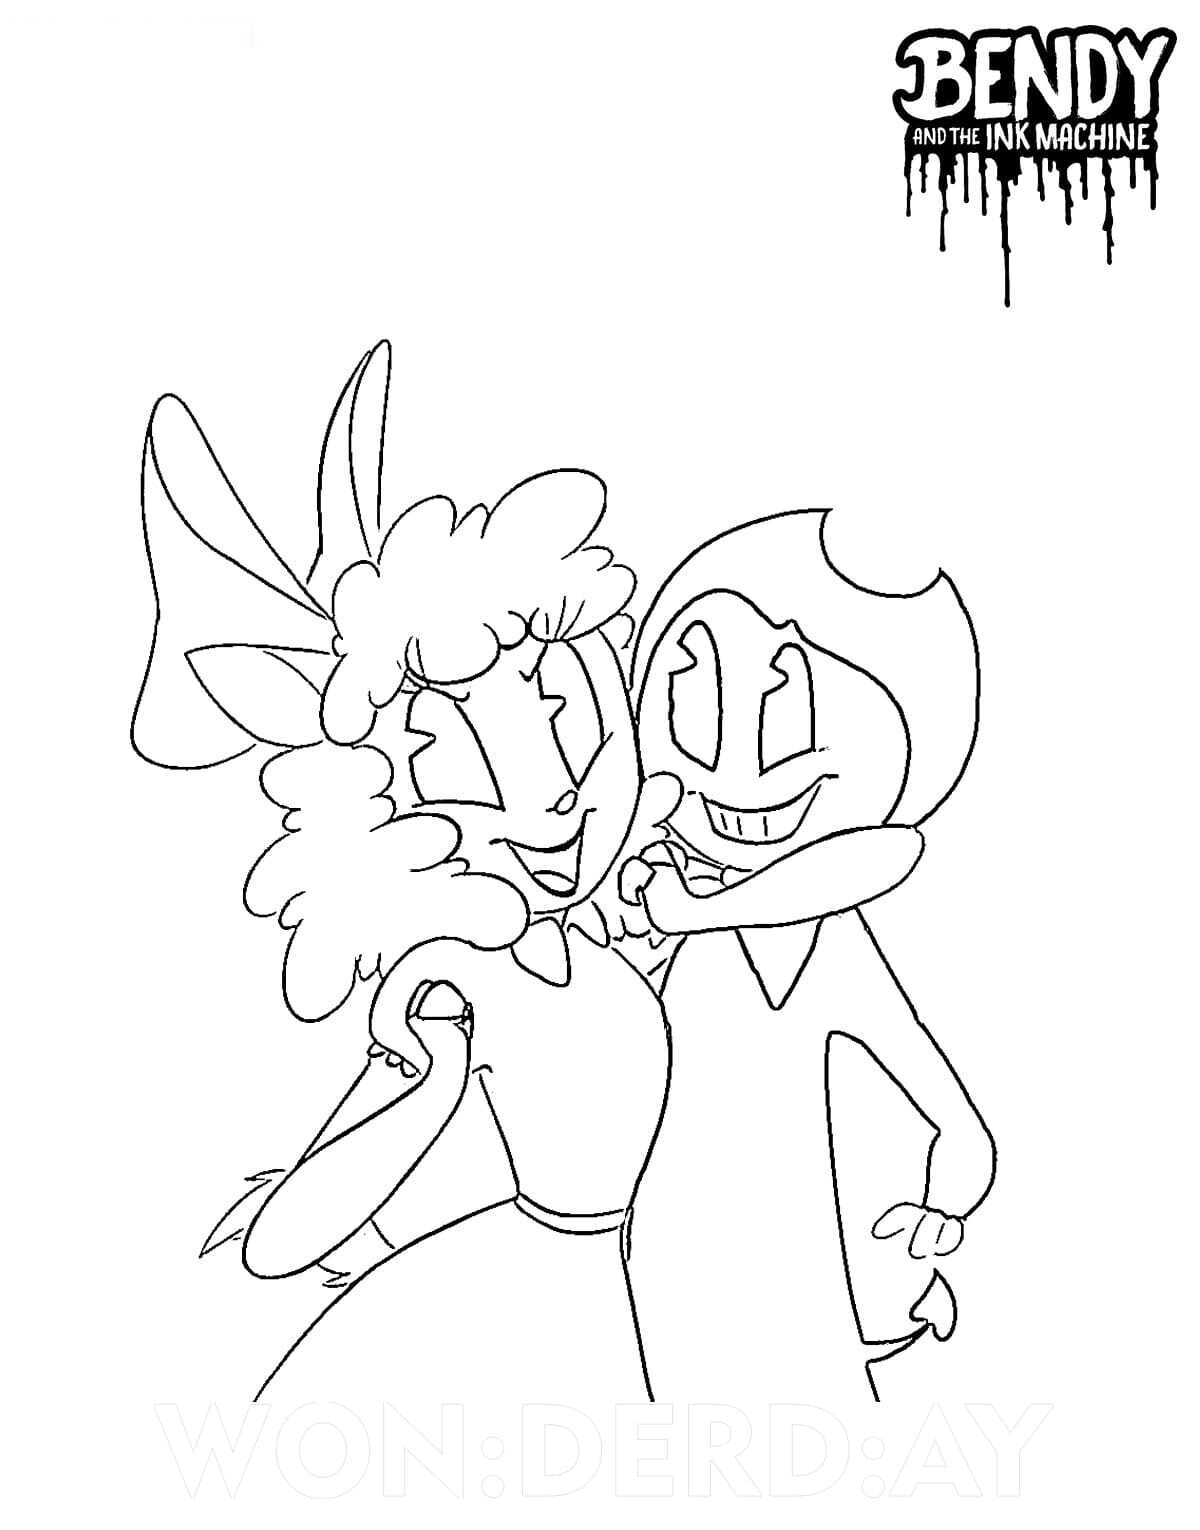 Lady sheep hugs Bendy from Bendy and the Ink Machine Coloring Page